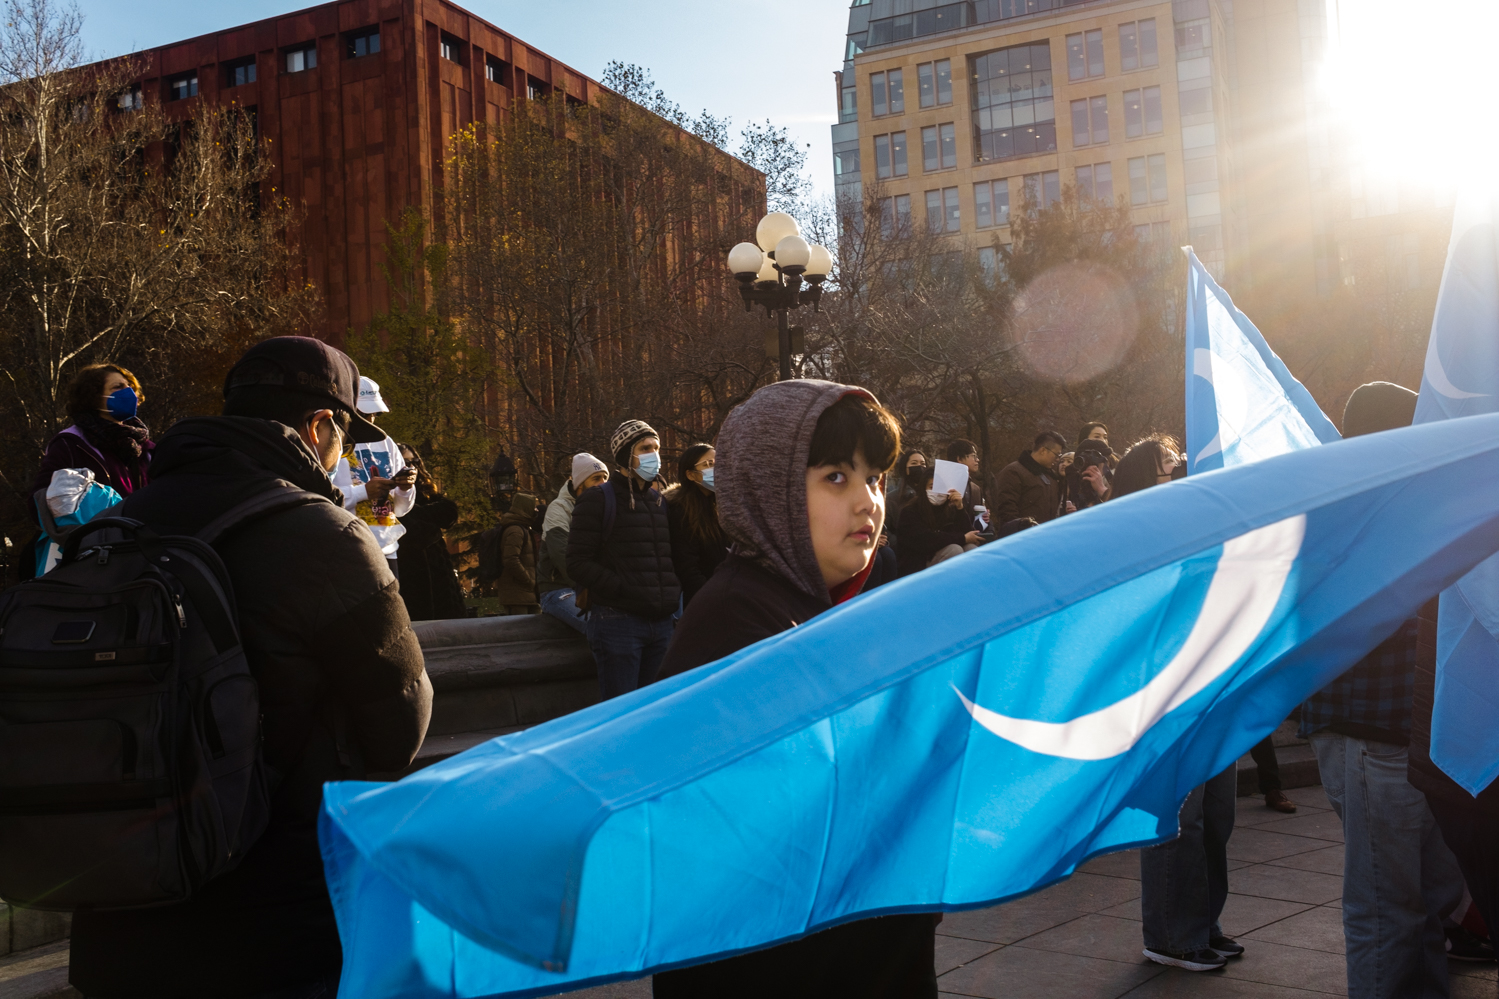 A young Uyghur boy waves the East Turkestan flag — blue flags with a white crescent moon and star.